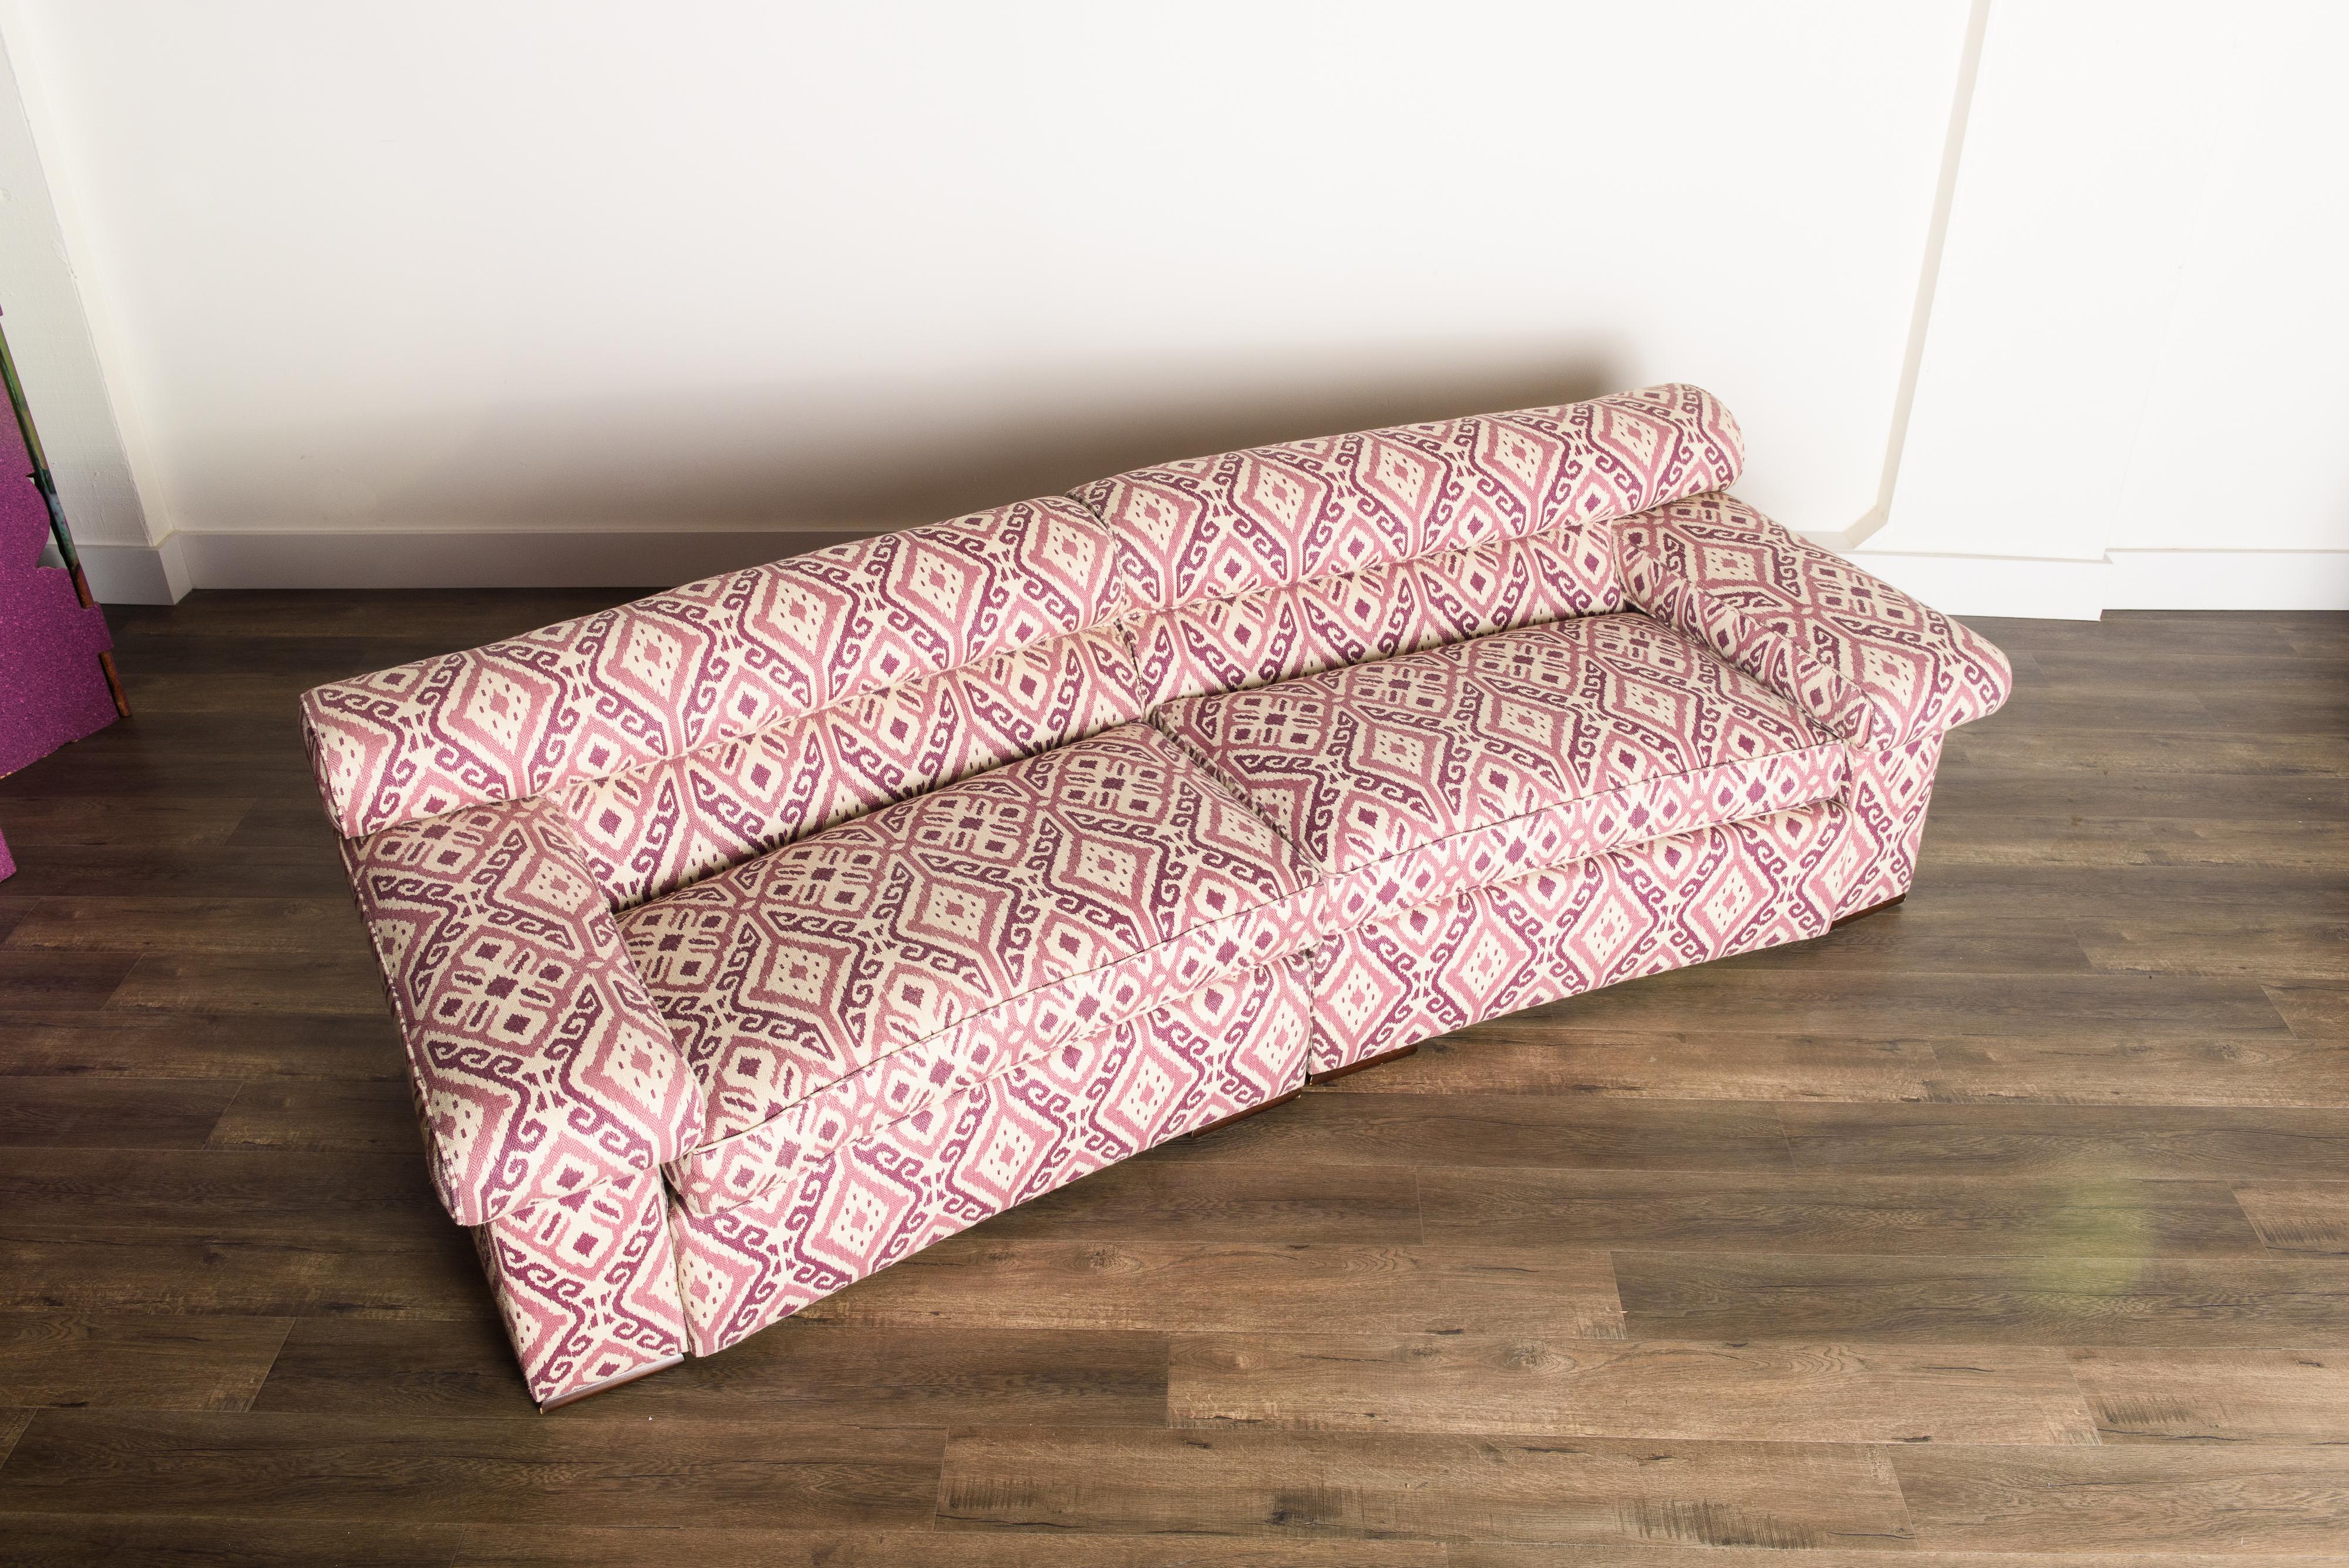 Paul Laszlo Attributed Curved Sectional Sofa Reupholstered in Pink Ikat Fabric In Excellent Condition For Sale In Los Angeles, CA